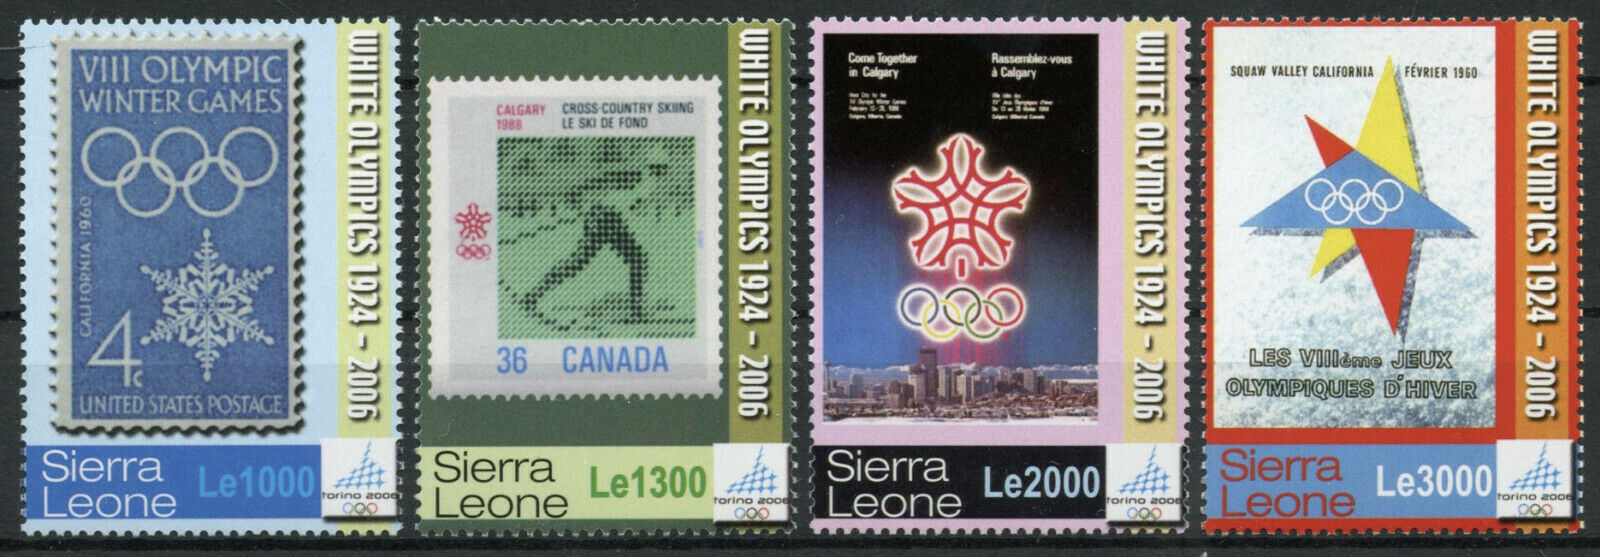 Sierra Leone Winter Olympics Stamps 2006 MNH Torino Stamps-on-Stamps 4v Set